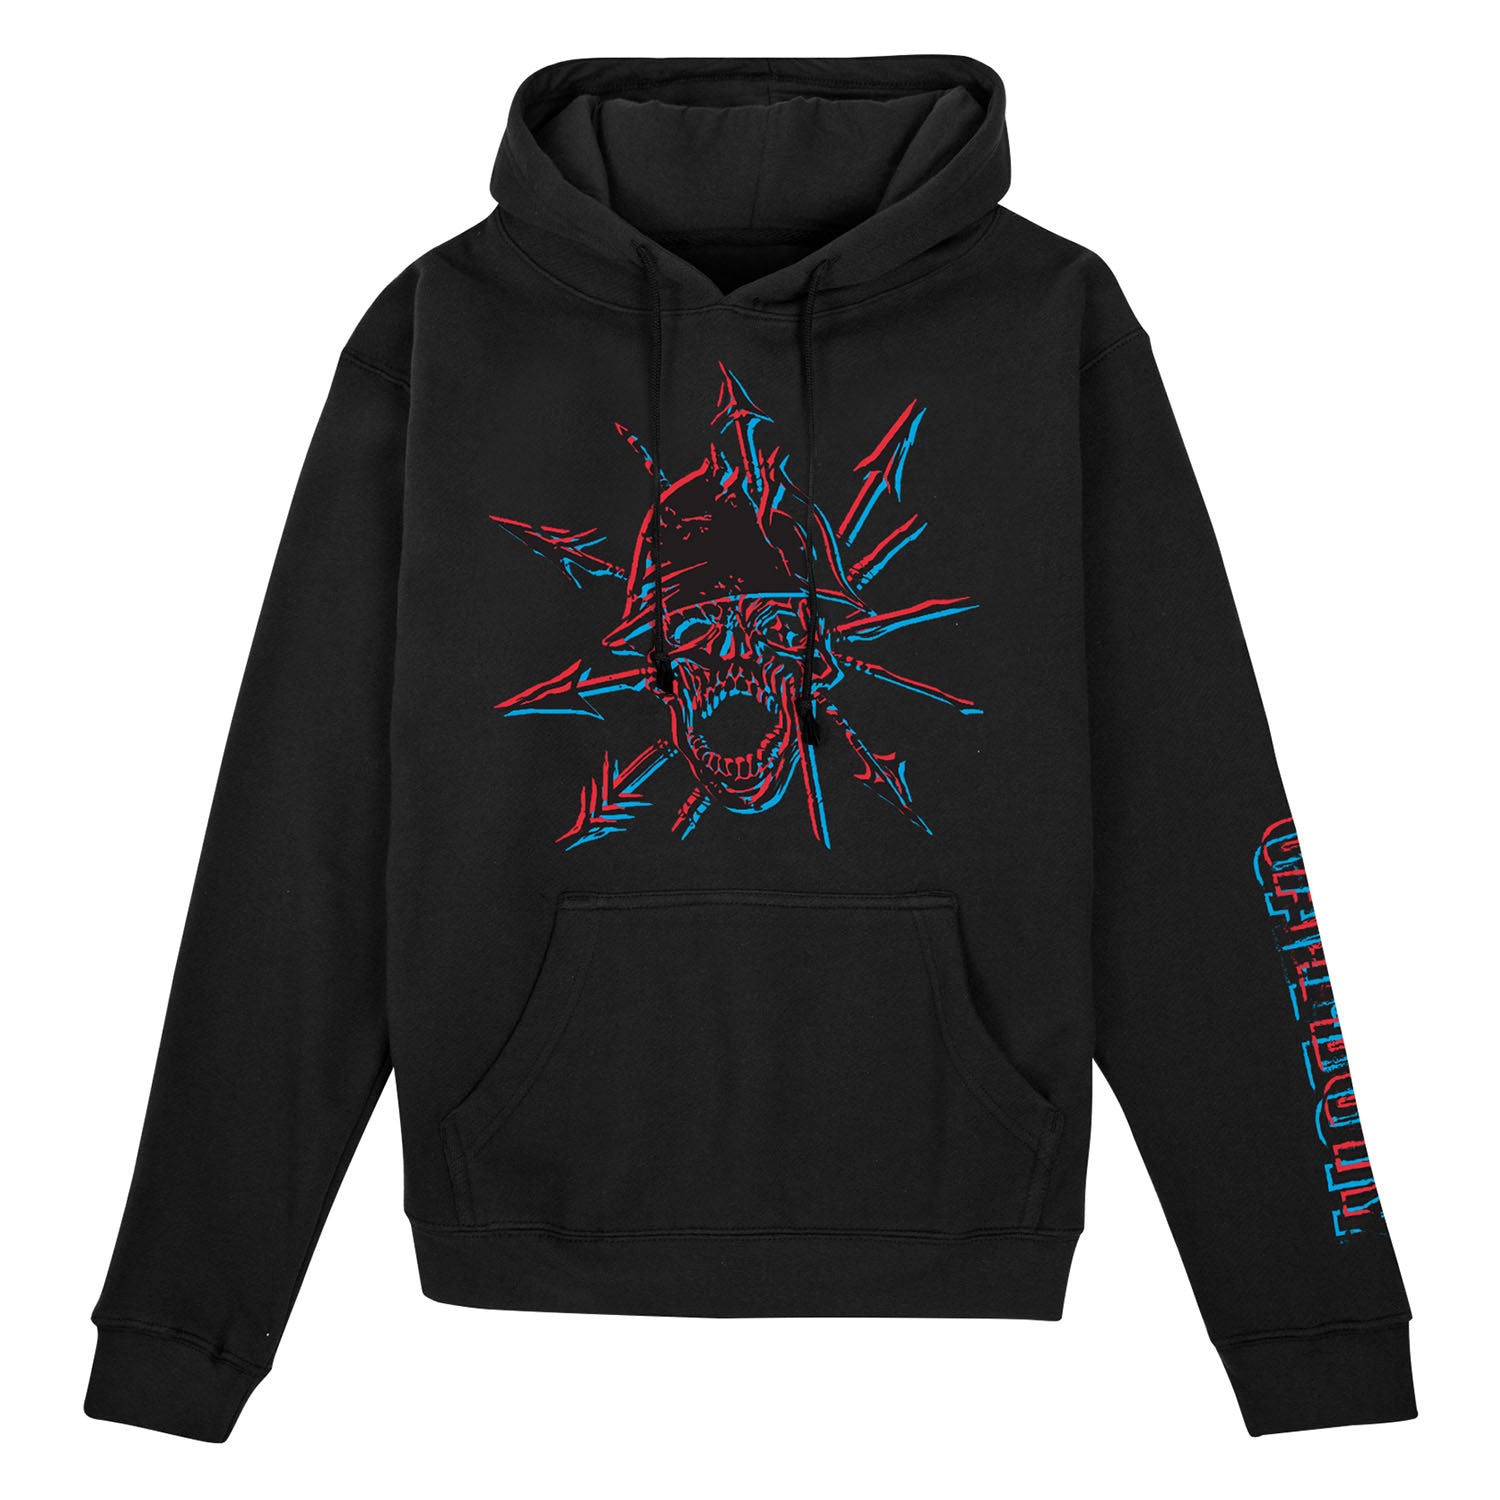 Call of Duty Black Free For All Logo Hoodie - Front View